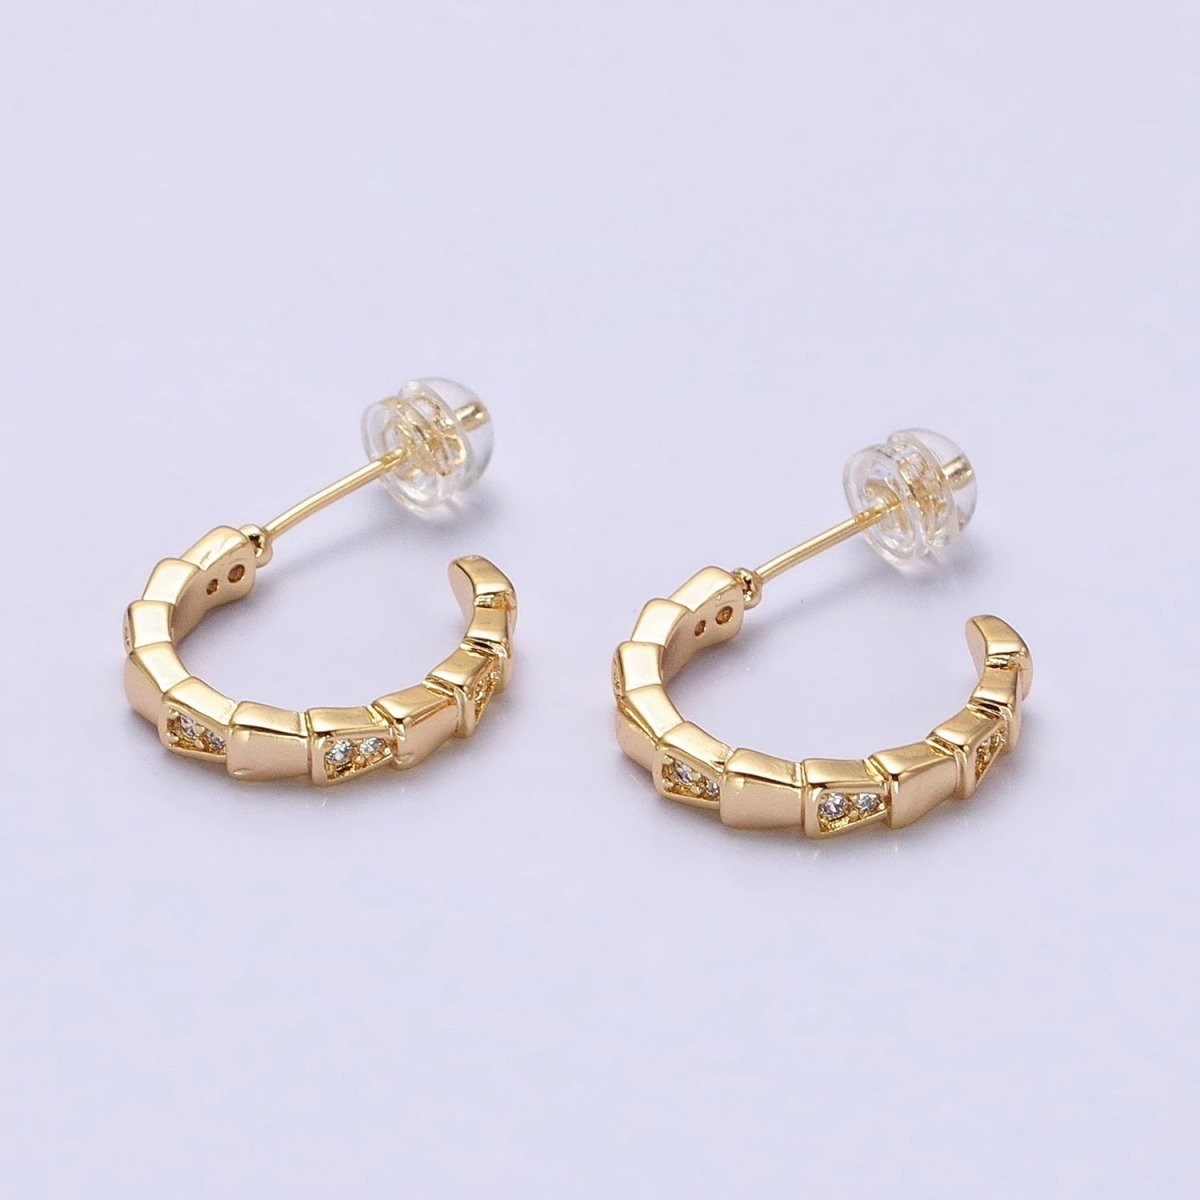 Modern Gold Hoop Earring With Cz Stone Silver Lizard Tail Design AB643 AB644 - DLUXCA